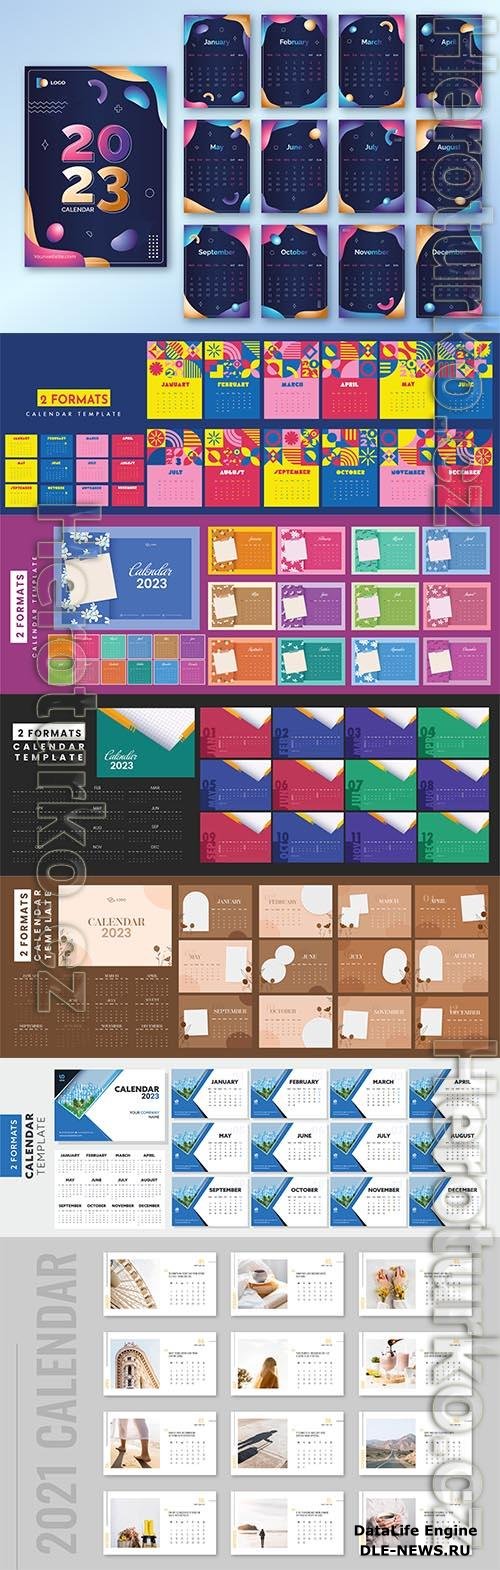 2 formats complete set of 12 month 2023 calendar template layout for publishing